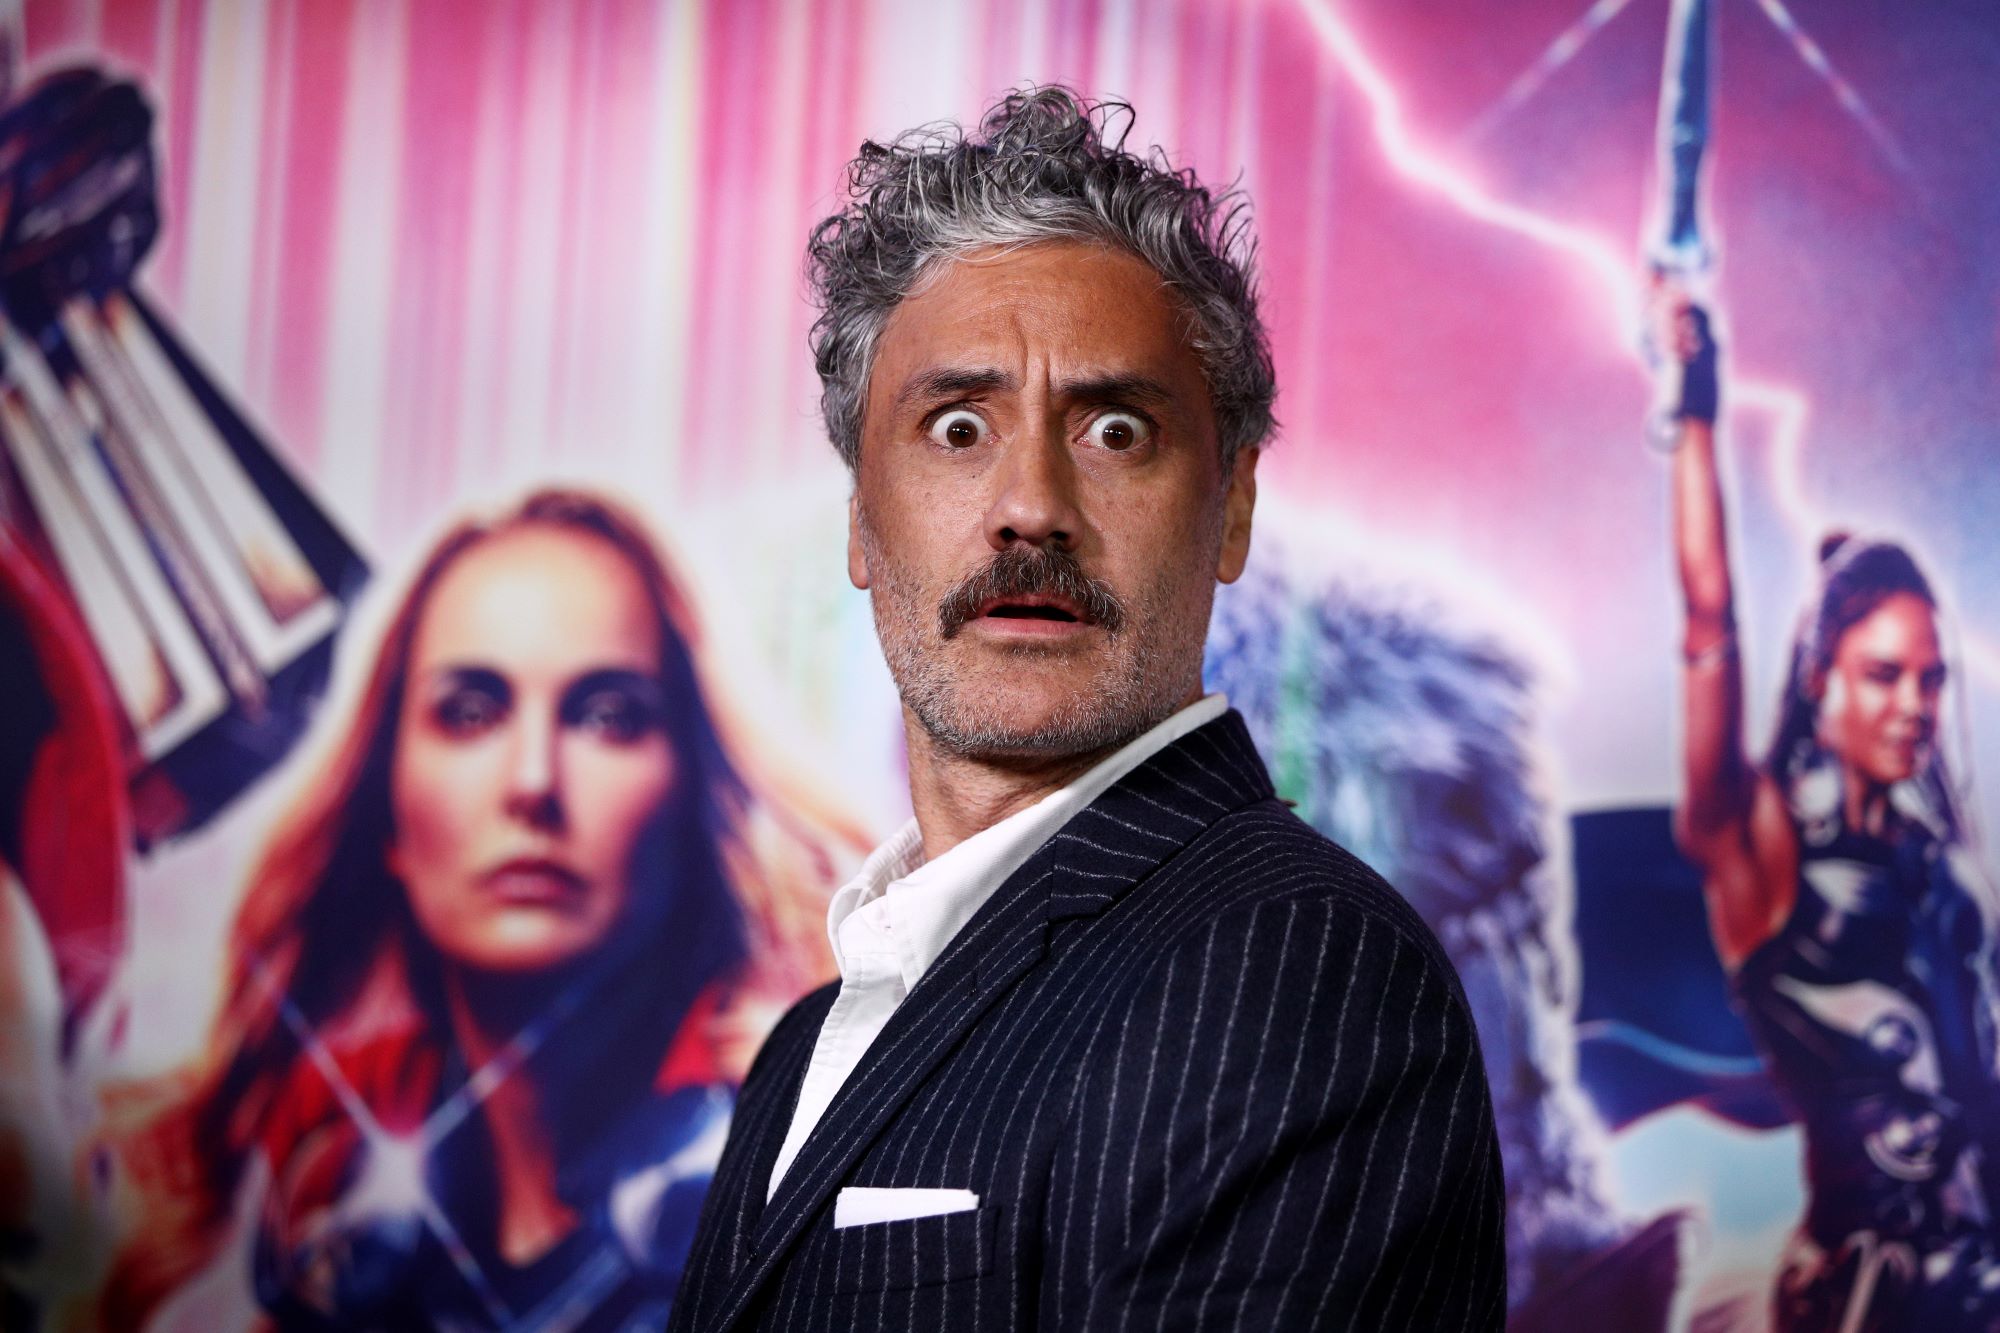 Taika Waititi, who directed 'Thor: Love and Thunder,' wears a black